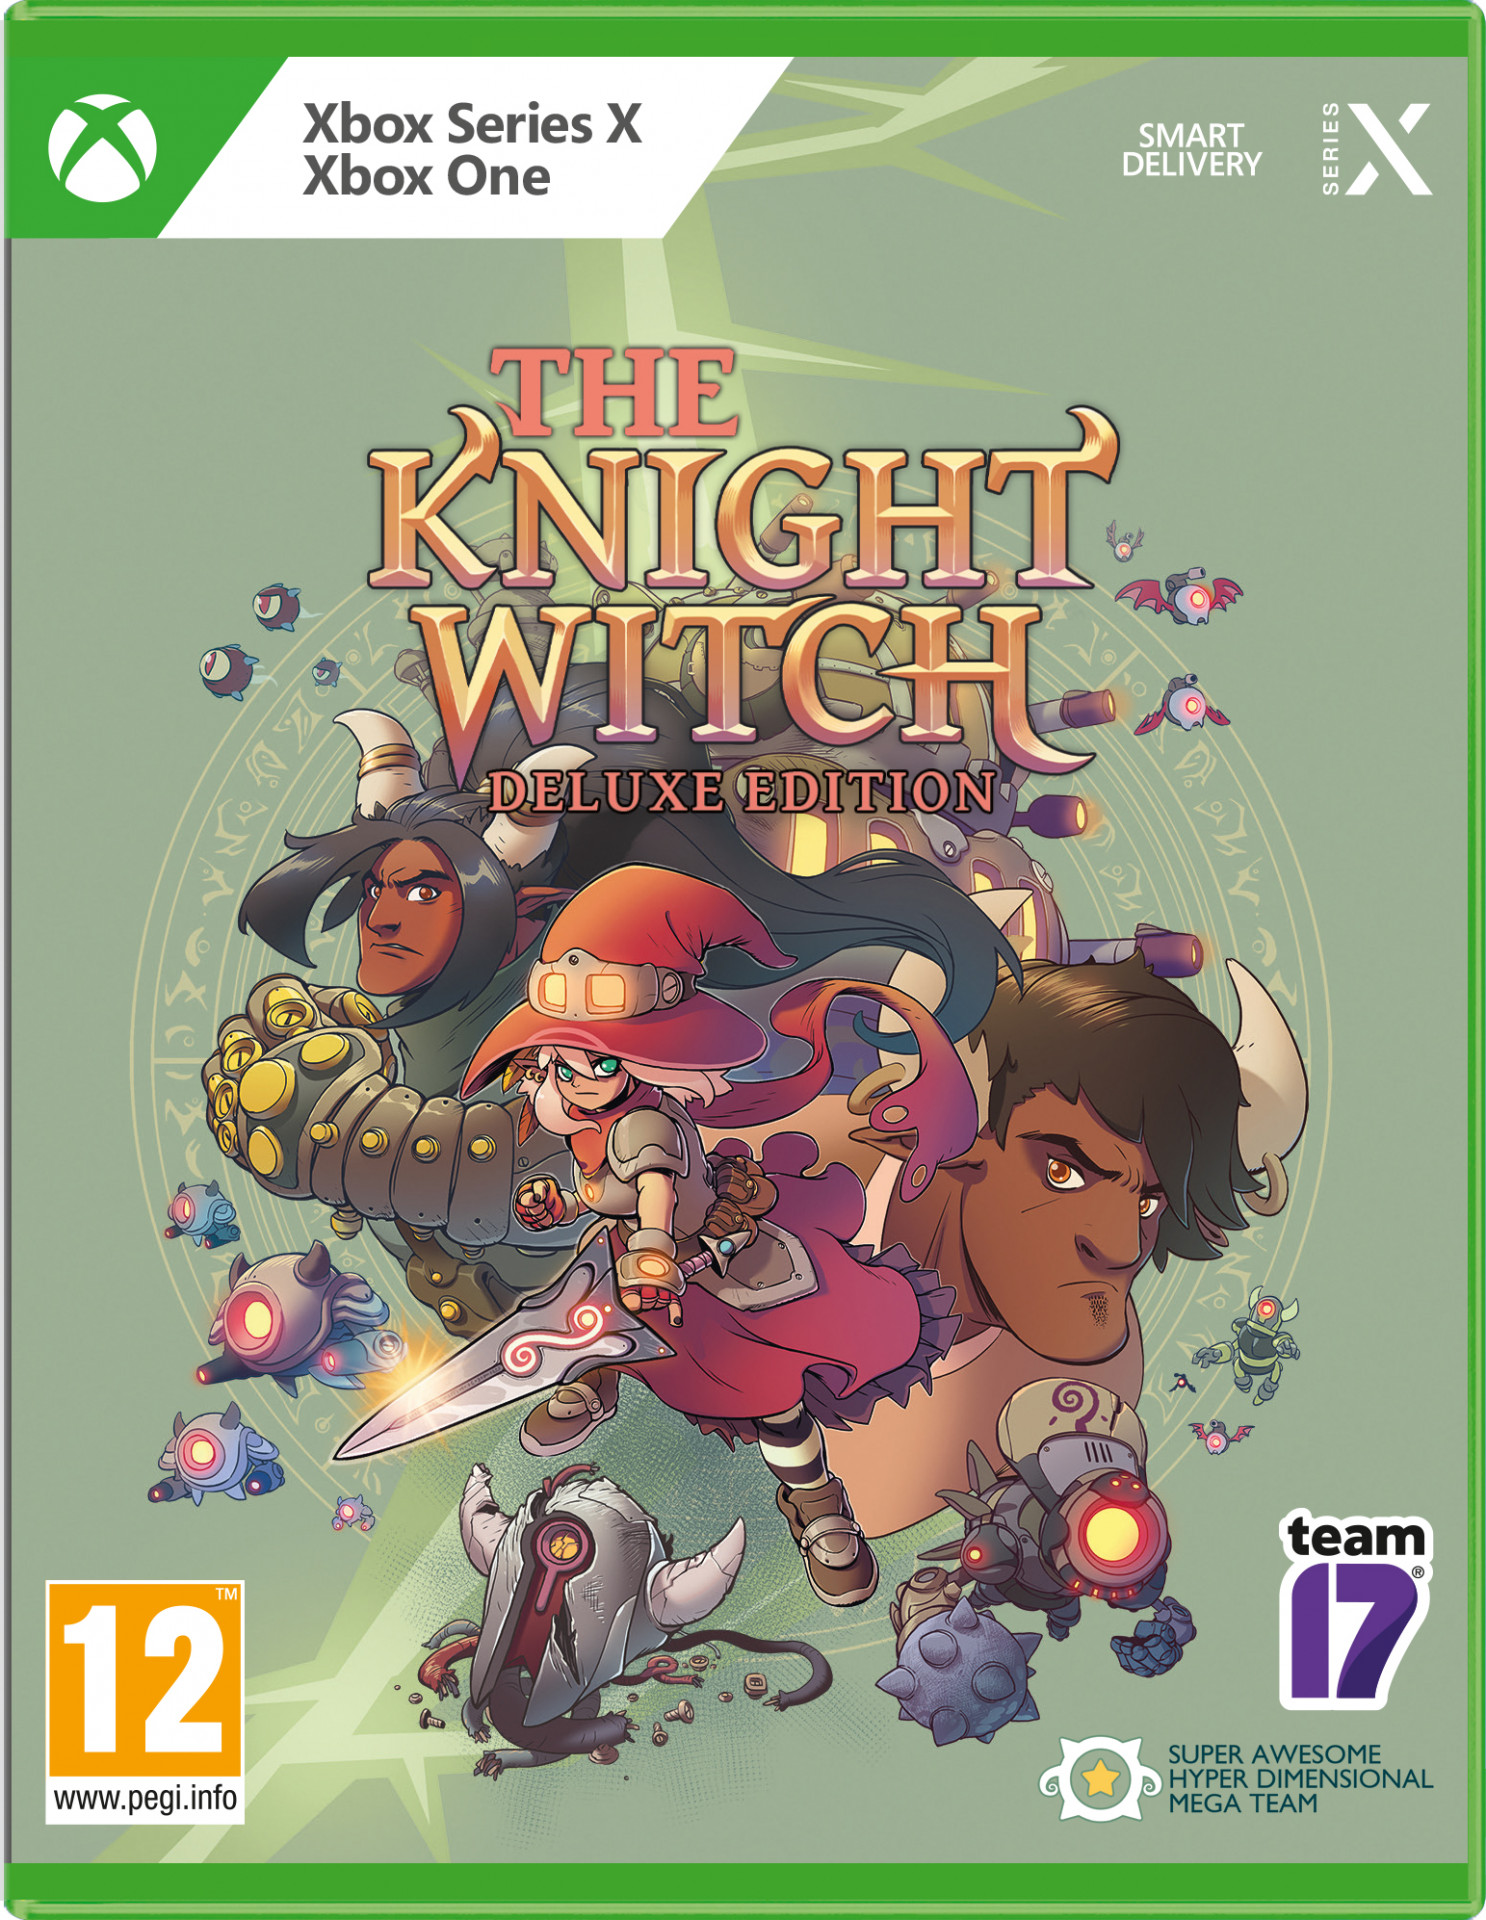 The Knight Witch - Deluxe Edition (Xbox One), Team 17